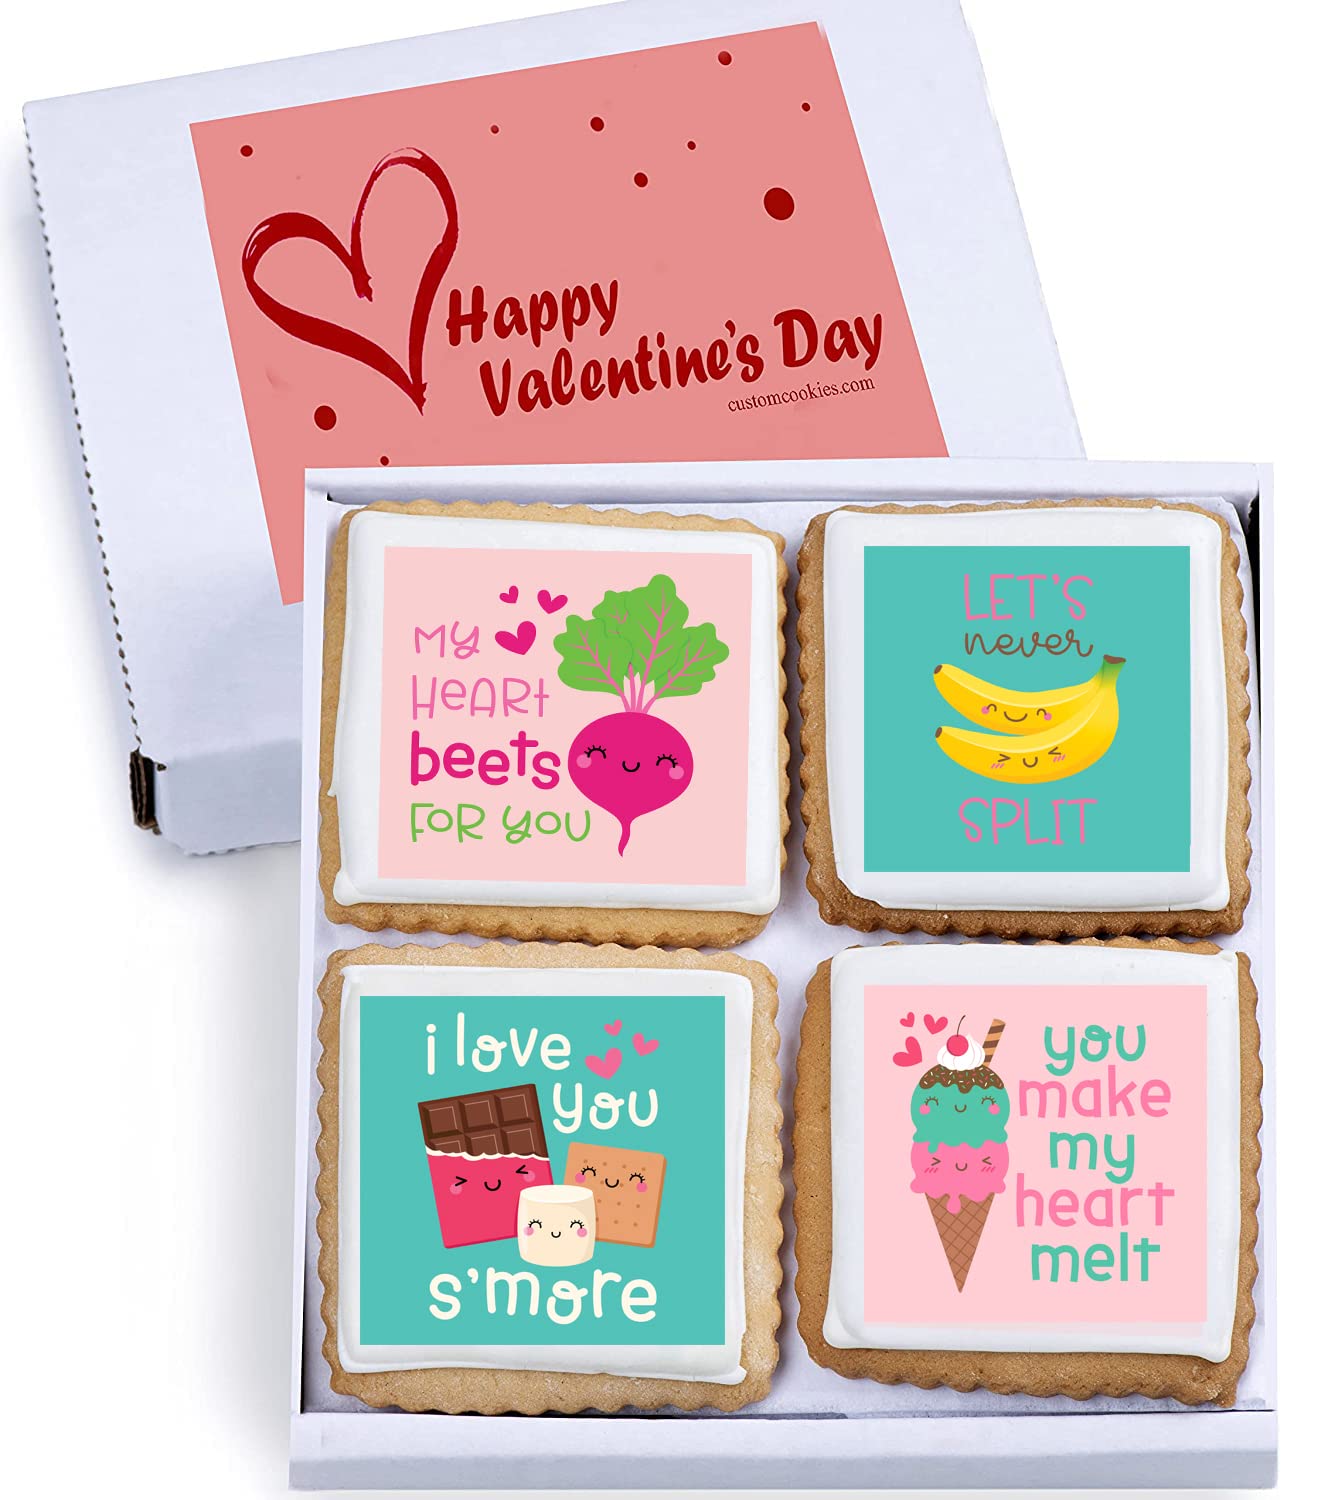 V-DAY GIFTS FOR HIM & HER ( PRIME)